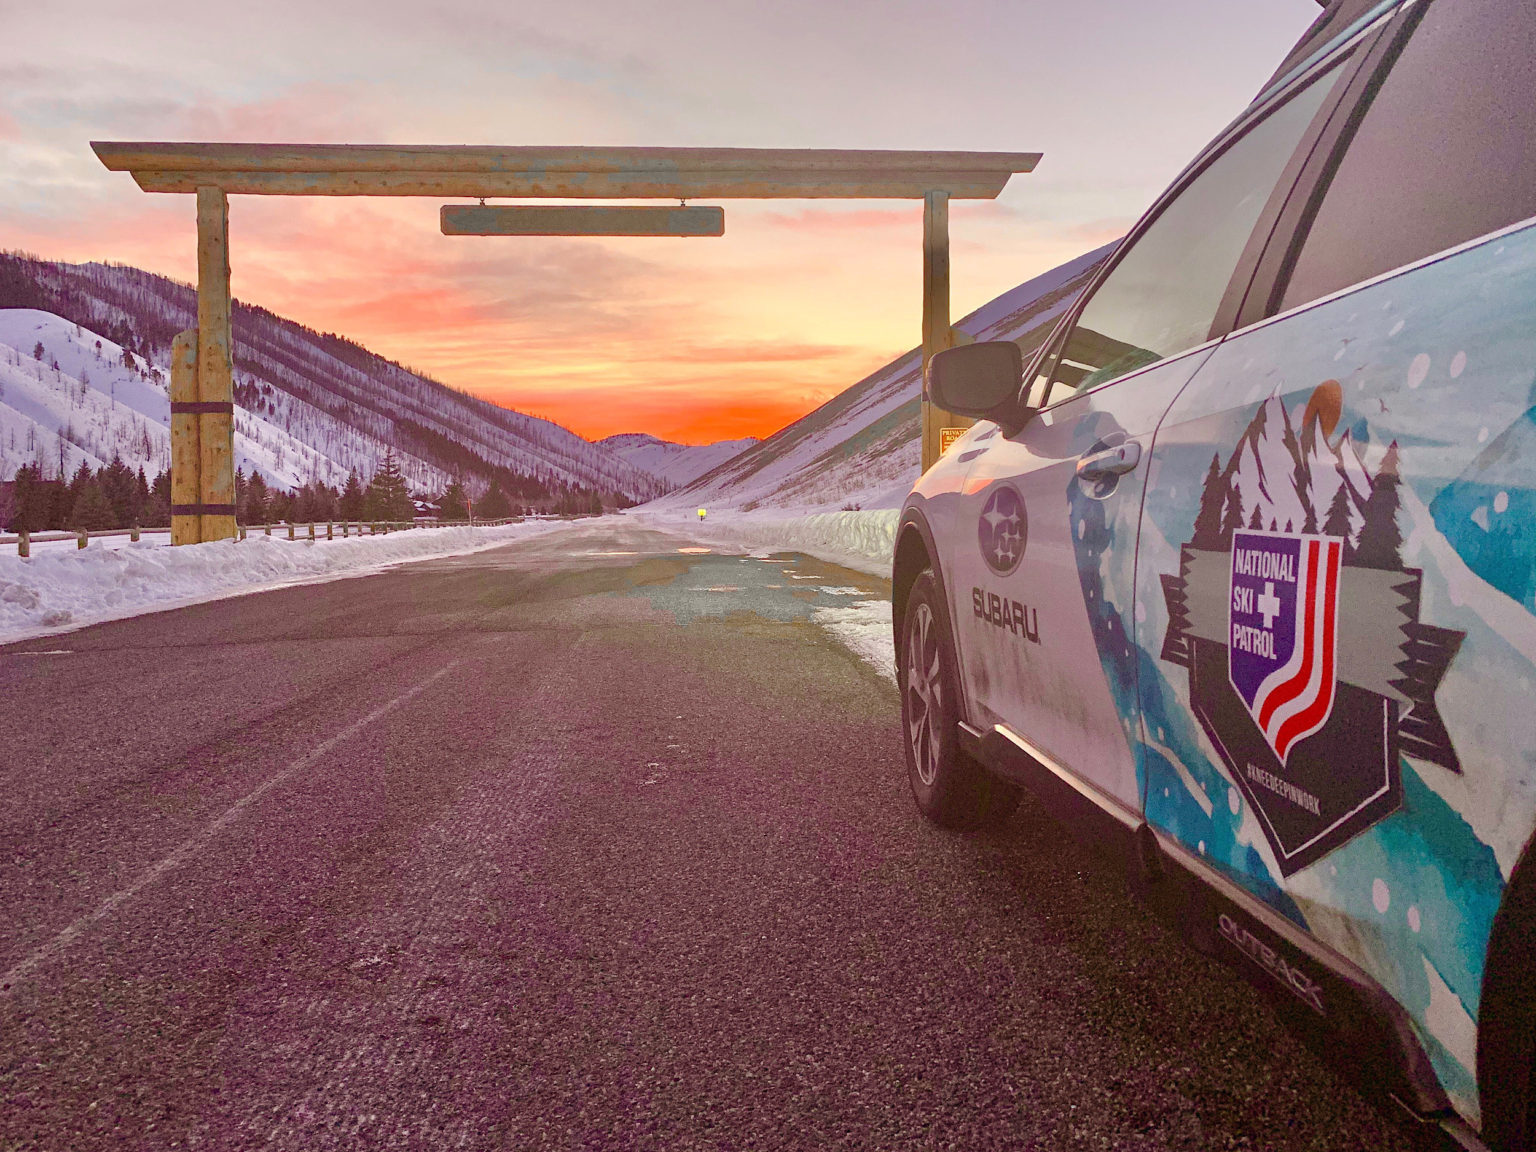 The National Ski Patrol and Subaru have partnered for the last 25 years.